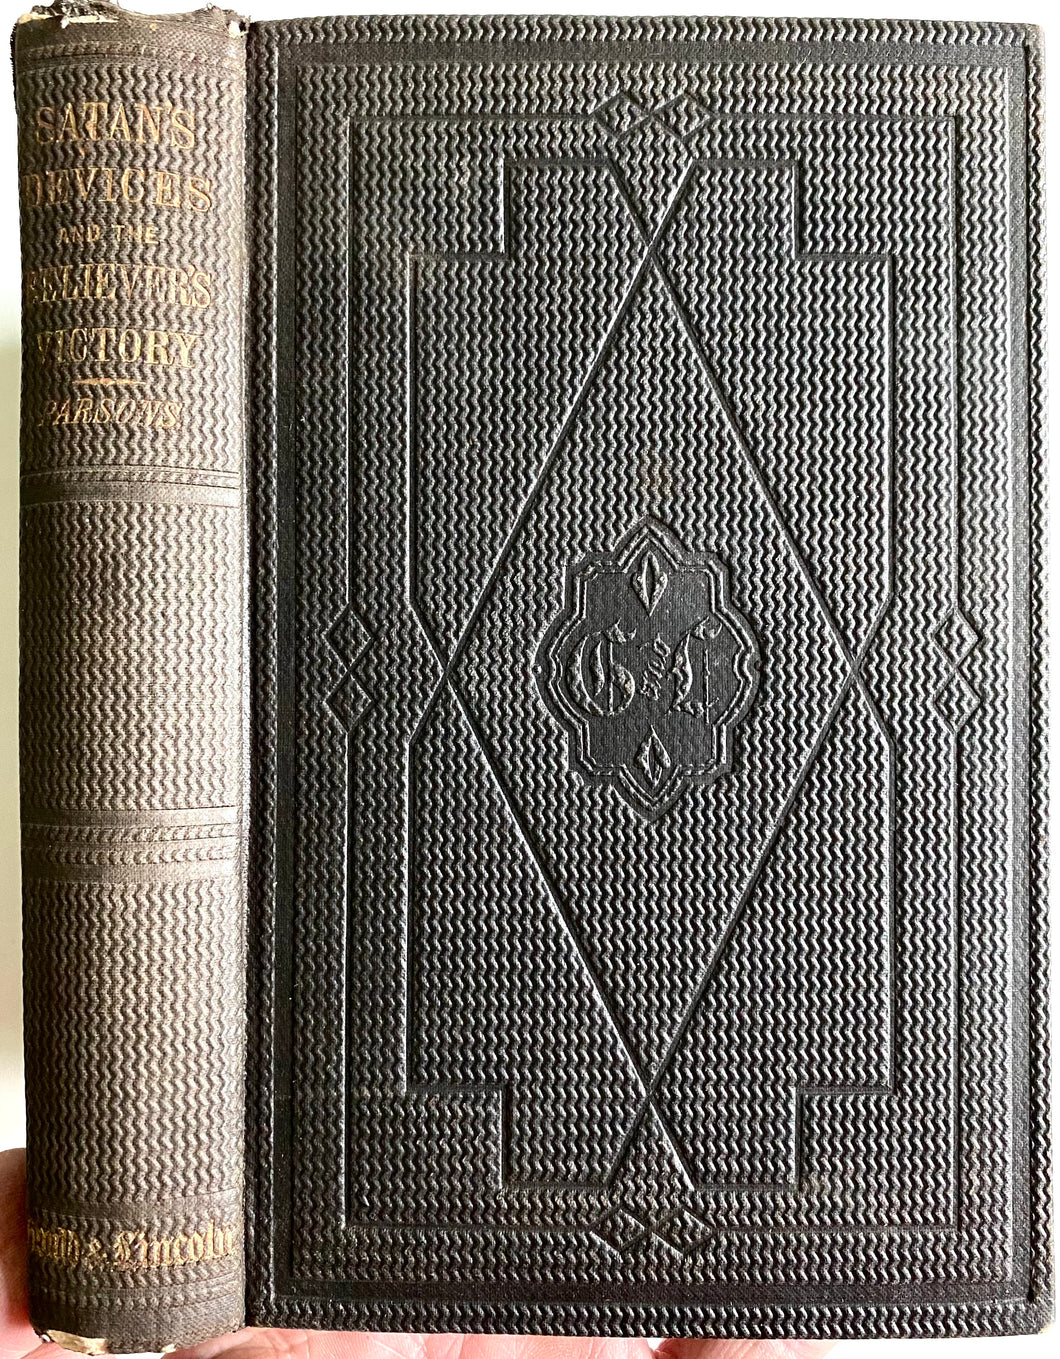 1864 WILLIAM L. PARSONS. Satan's Devices and the Believer's Victory - RARE!